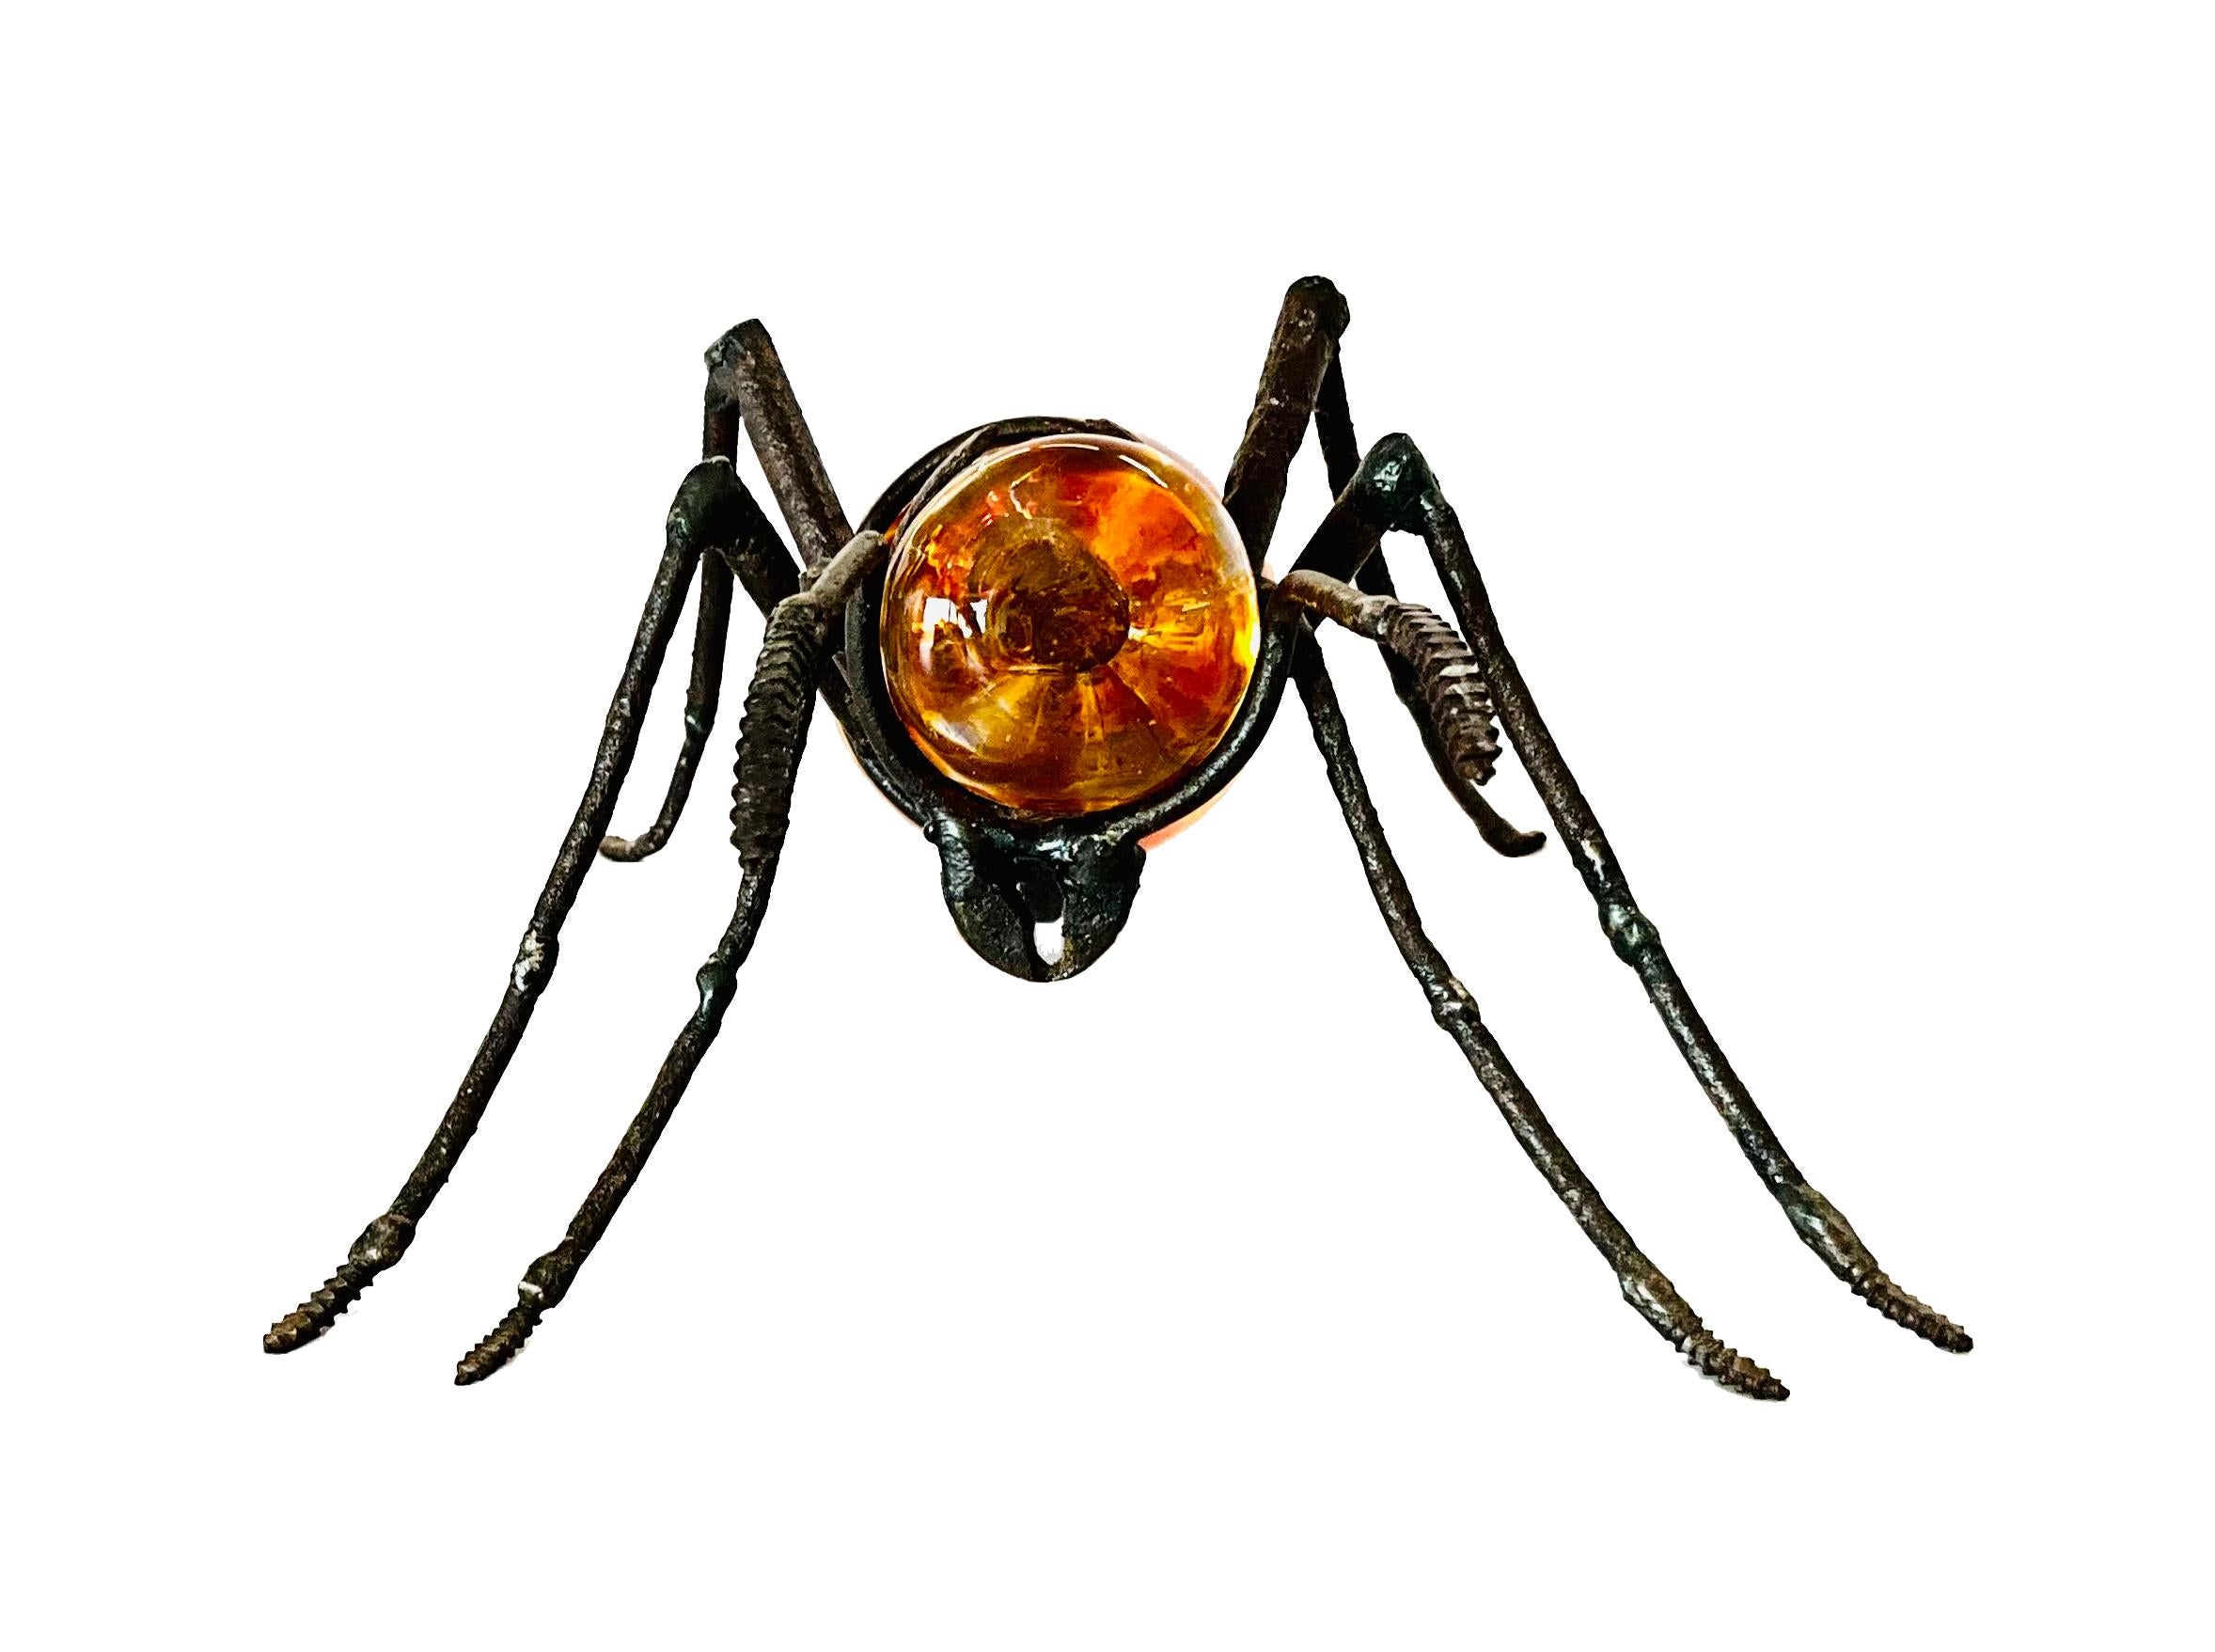 Hand-Blown Glass Ant, Recycled Steel and Dark Brown Crystal Parts  - Black Figurative Sculpture by Marcos Romero Gallardo